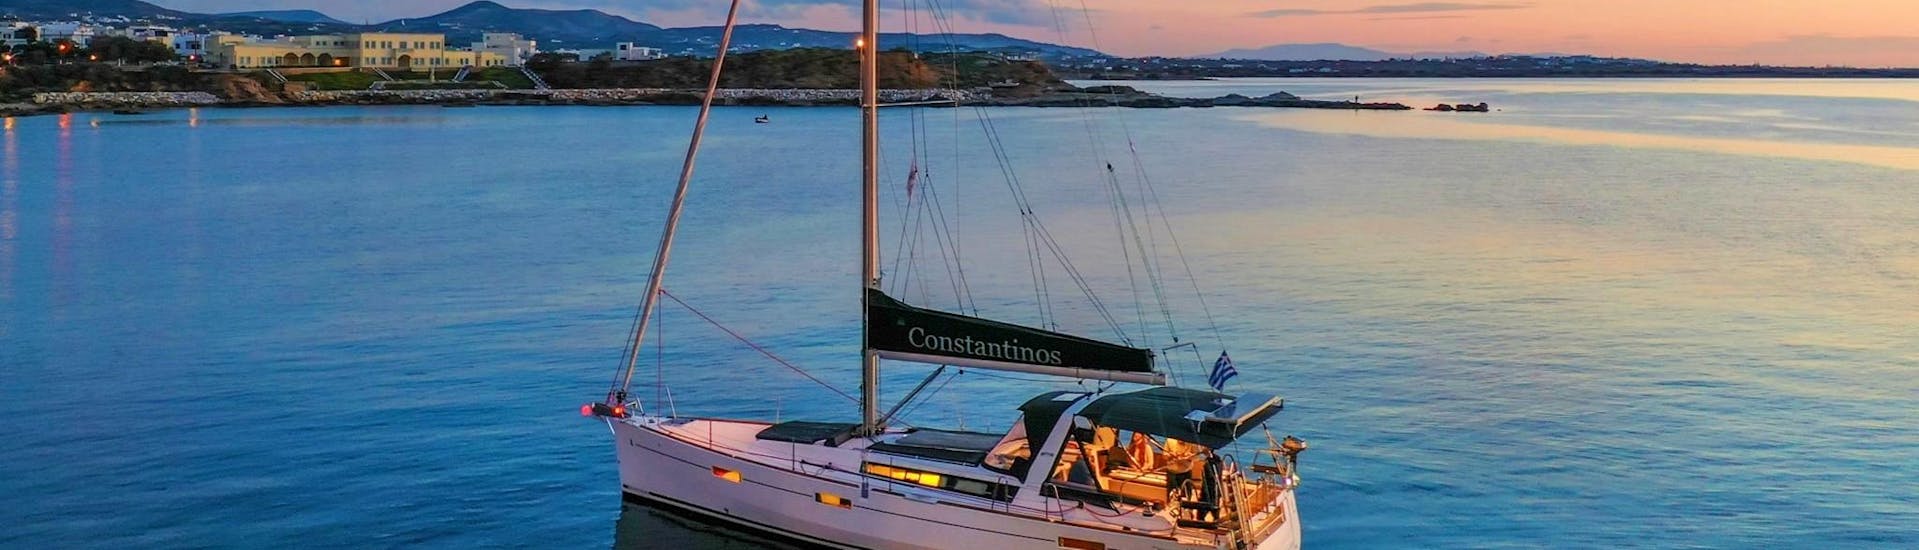 During the Sunset Sailing Cruise in Naxos with Naxos Catamaran, the boat is anchored at a viewing spot from where the participants can enjoy the beautiful sunset over the Aegean Sea.